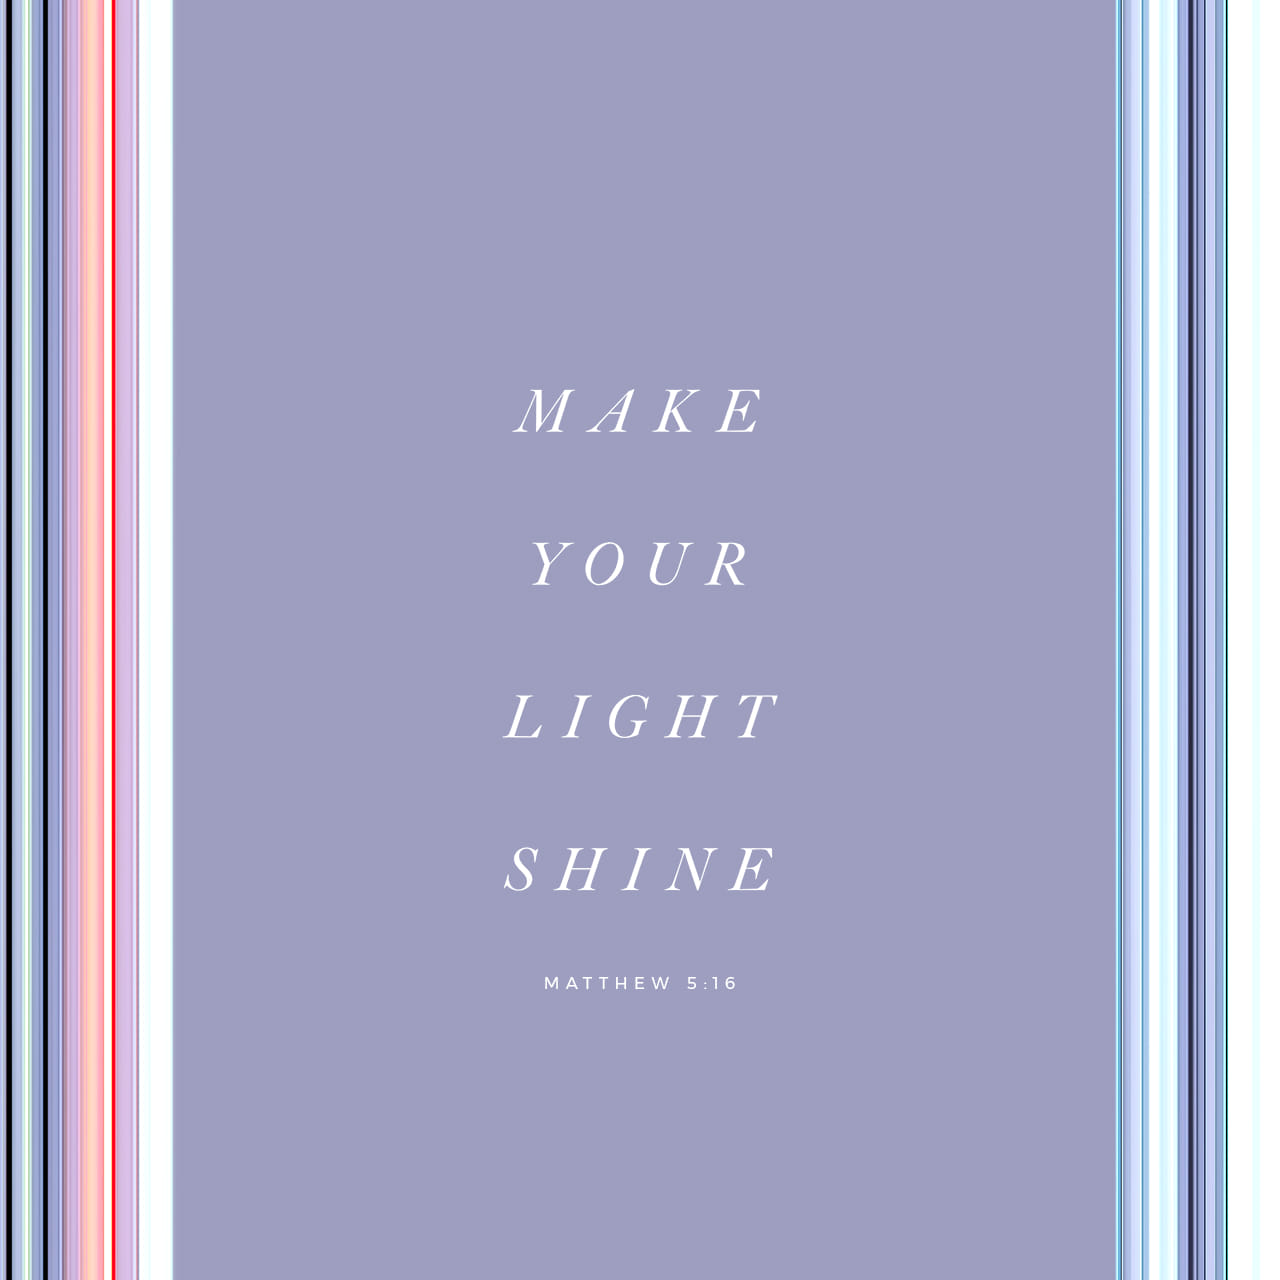 Matthew 5:16 Let your light so shine before men, that they may see your good works, and glorify your Father which is in heaven. | King James Version (KJV) | Download The Bible App Now